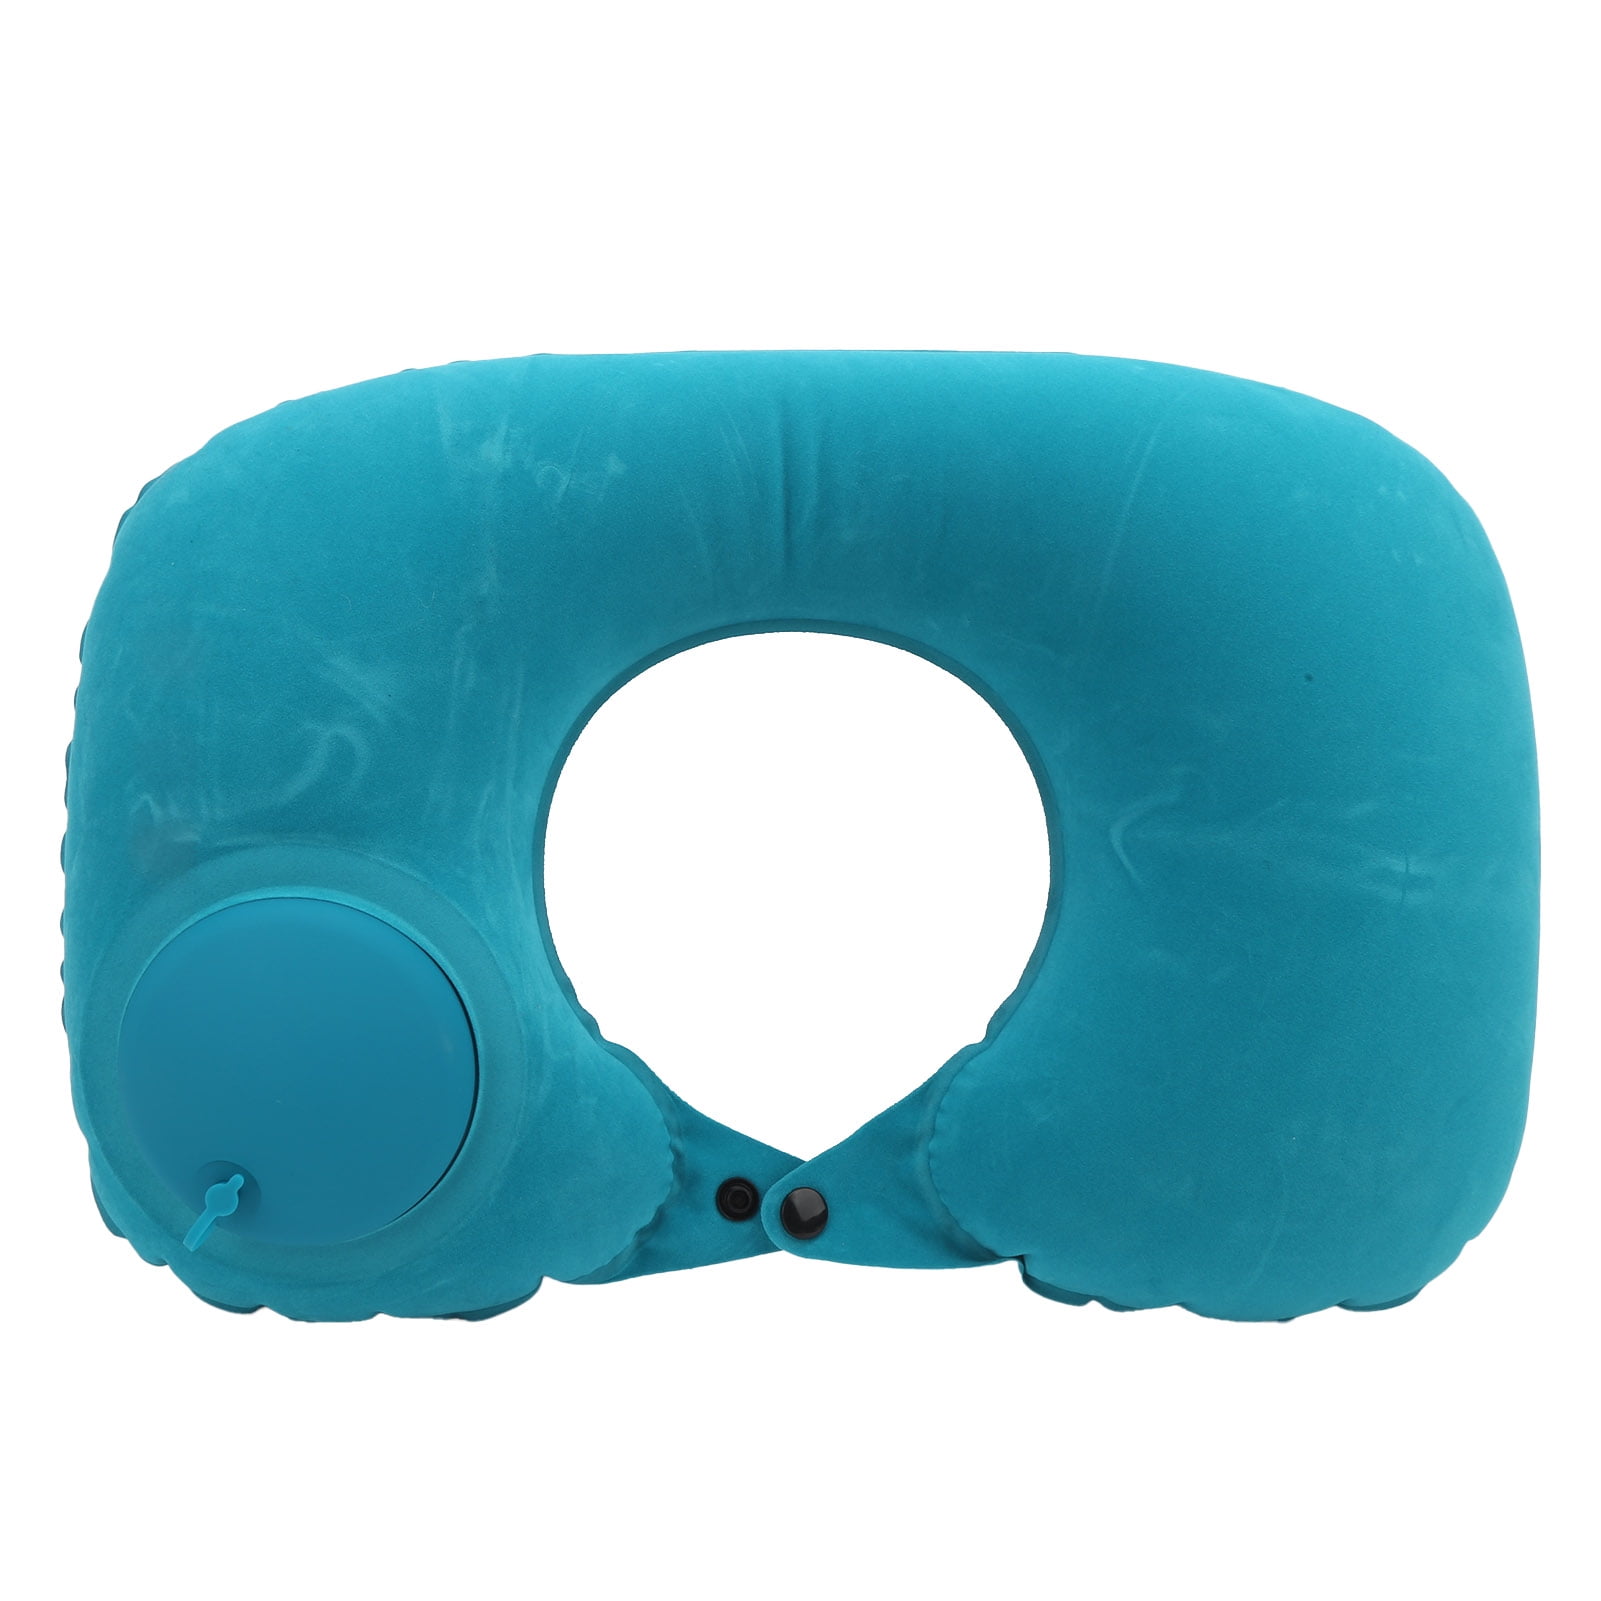 3 x Inflatable TRAVEL Neck PILLOW by OUT THERE Head Rest Cushion Camping Caravan 